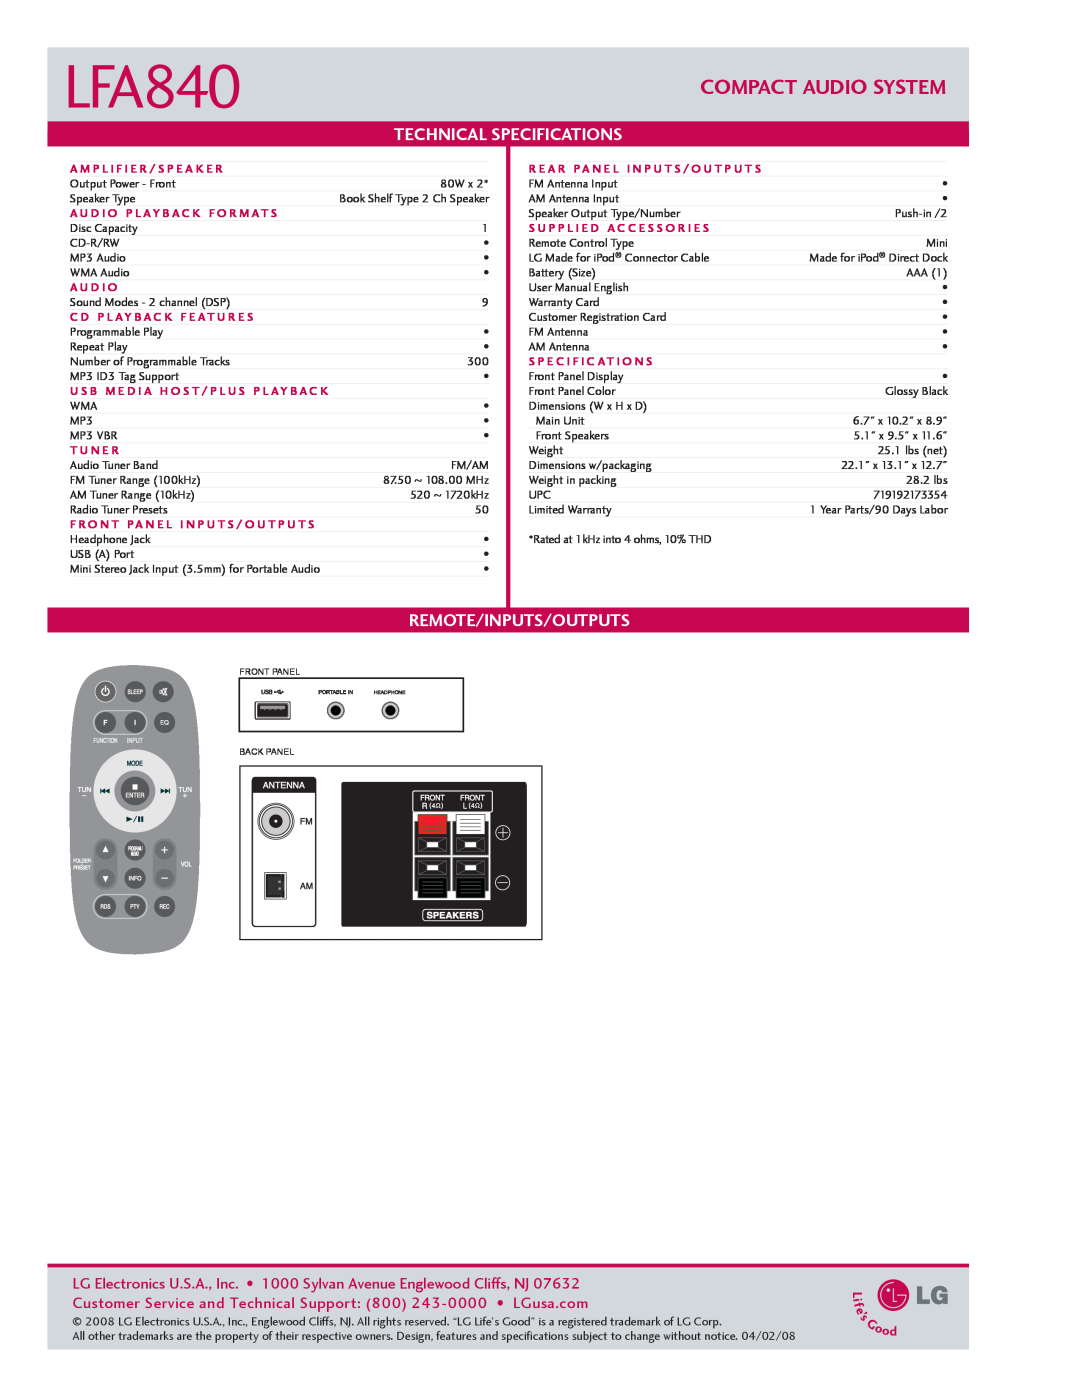 LG Electronics LFA840 manual Compact Audio System, Technical Specifications, Remote/Inputs/Outputs 